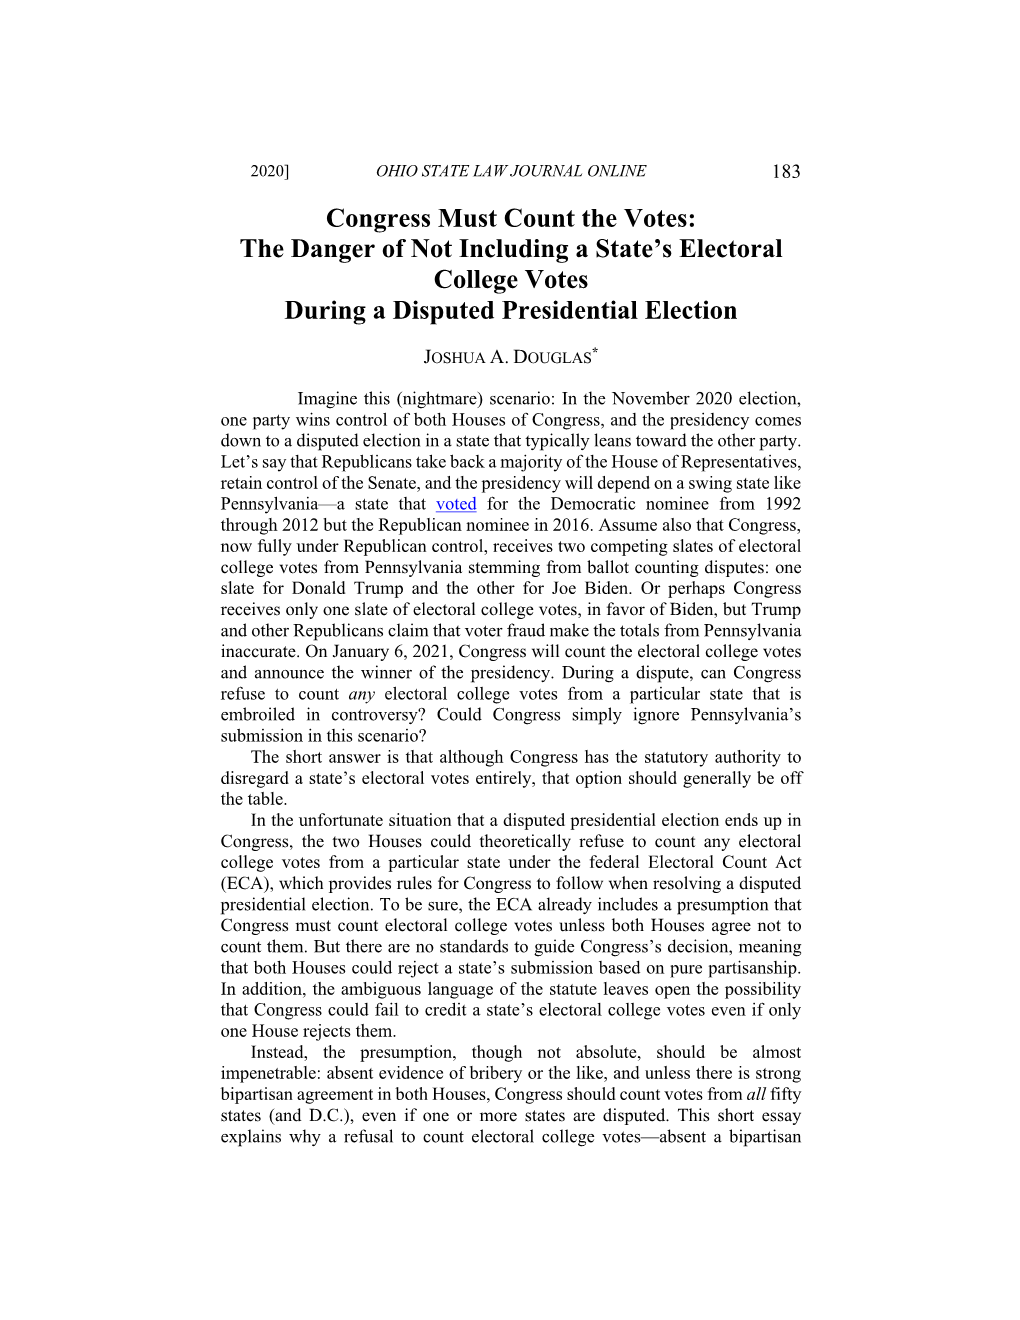 Congress Must Count the Votes: the Danger of Not Including a State's